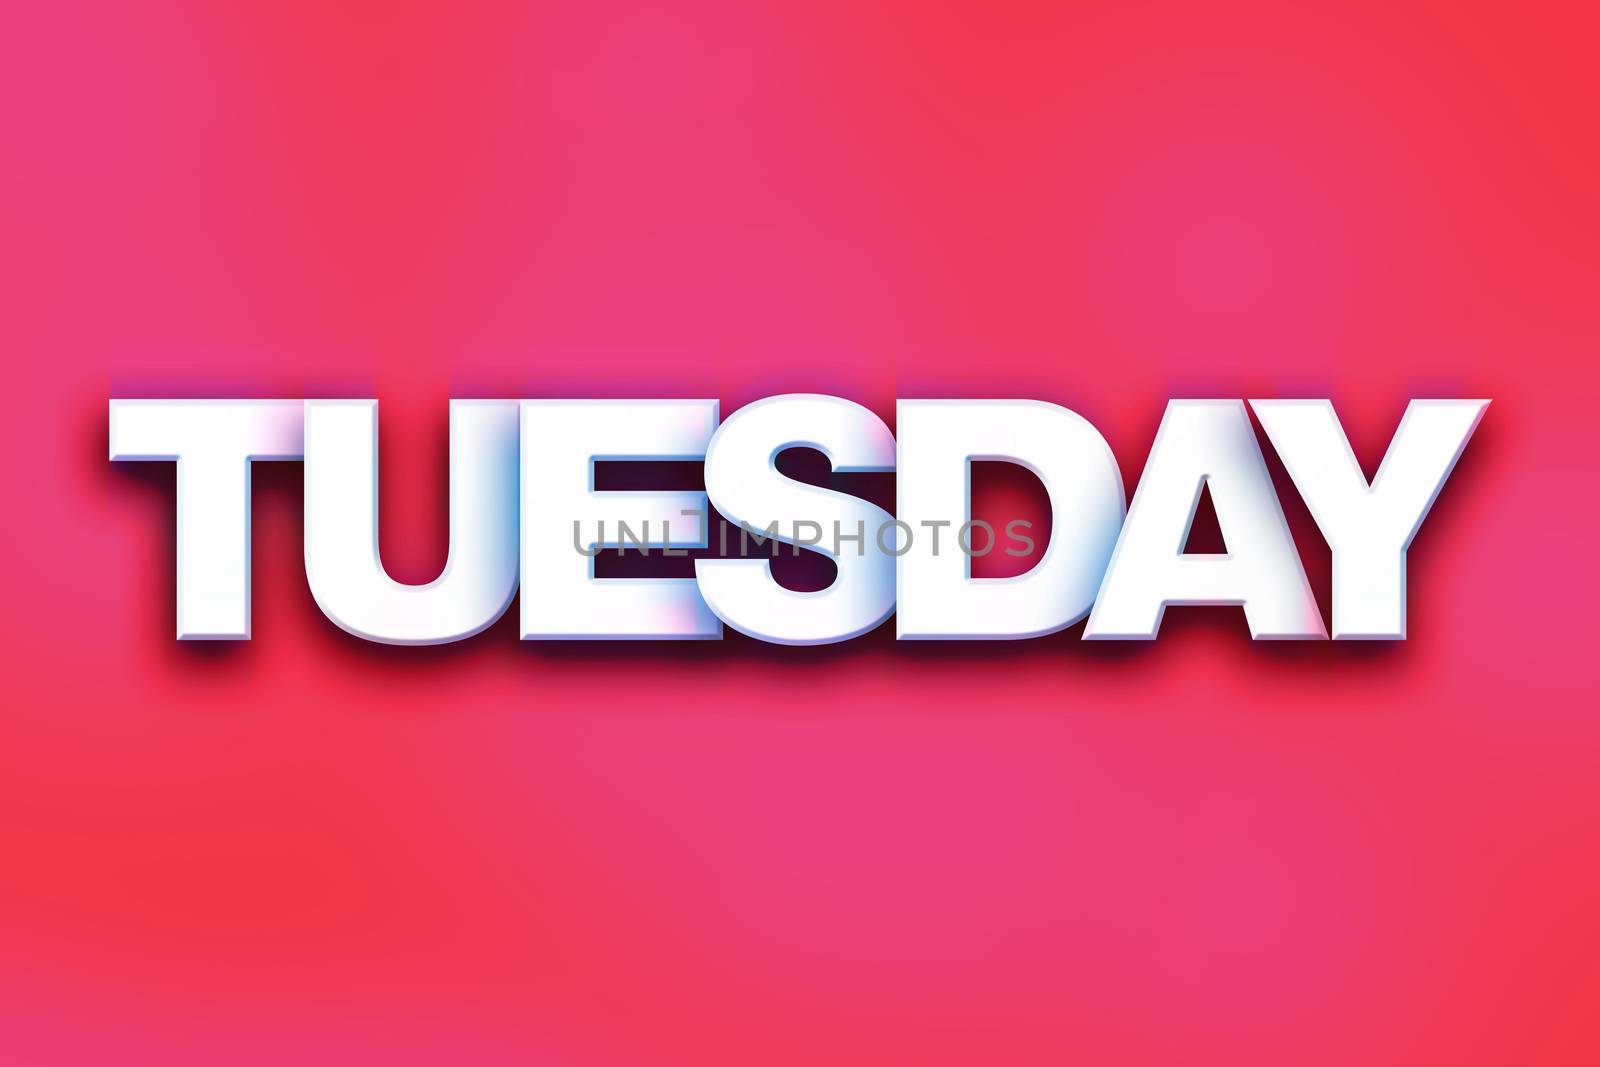 The word "Tuesday" written in white 3D letters on a colorful background concept and theme.